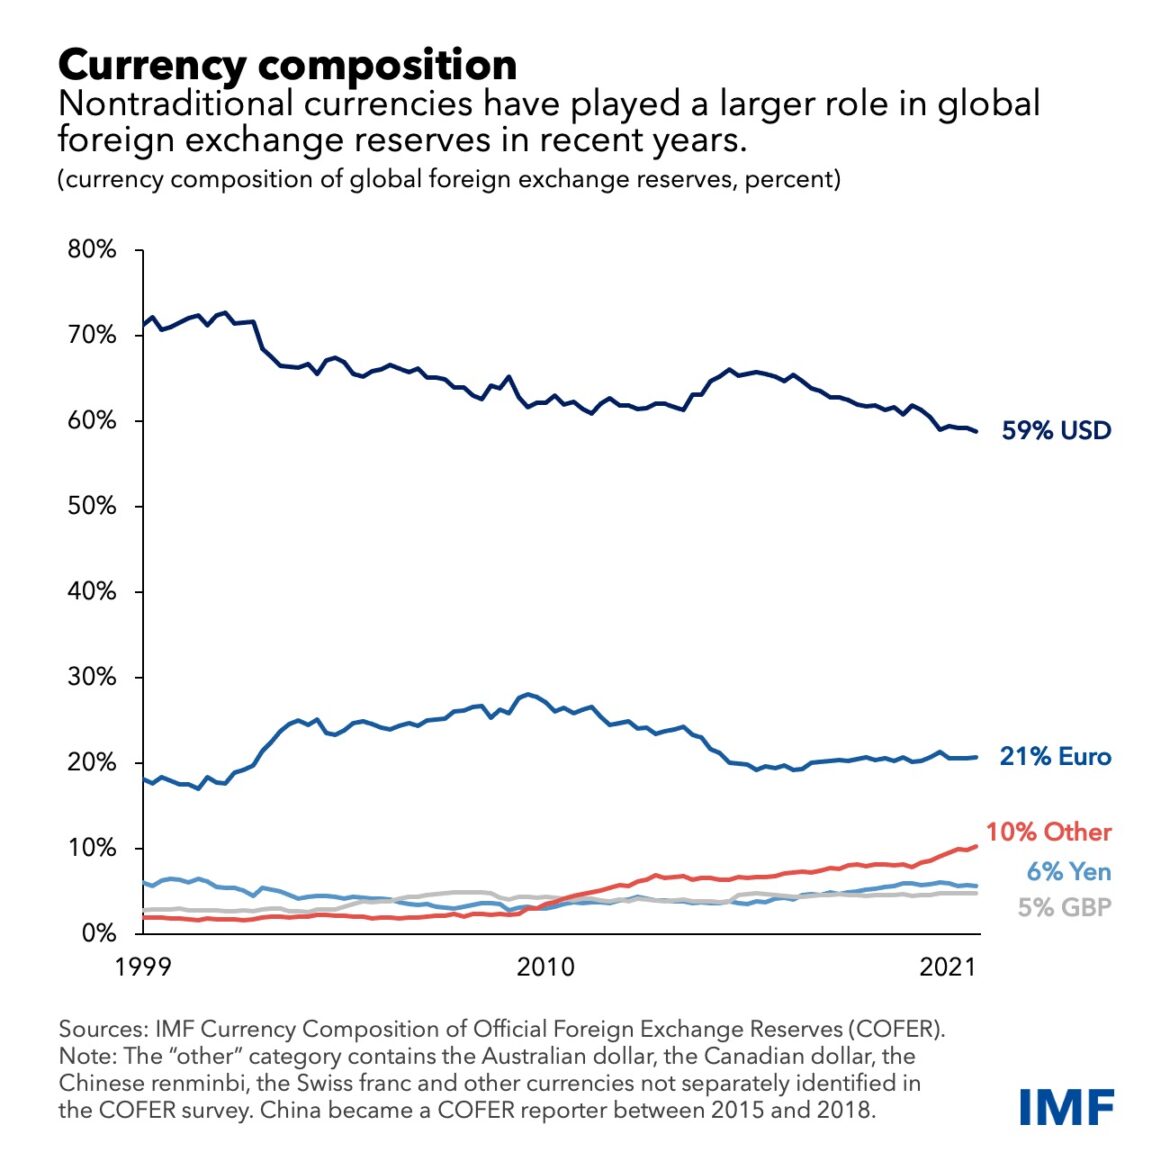 US dollar reserve currency status